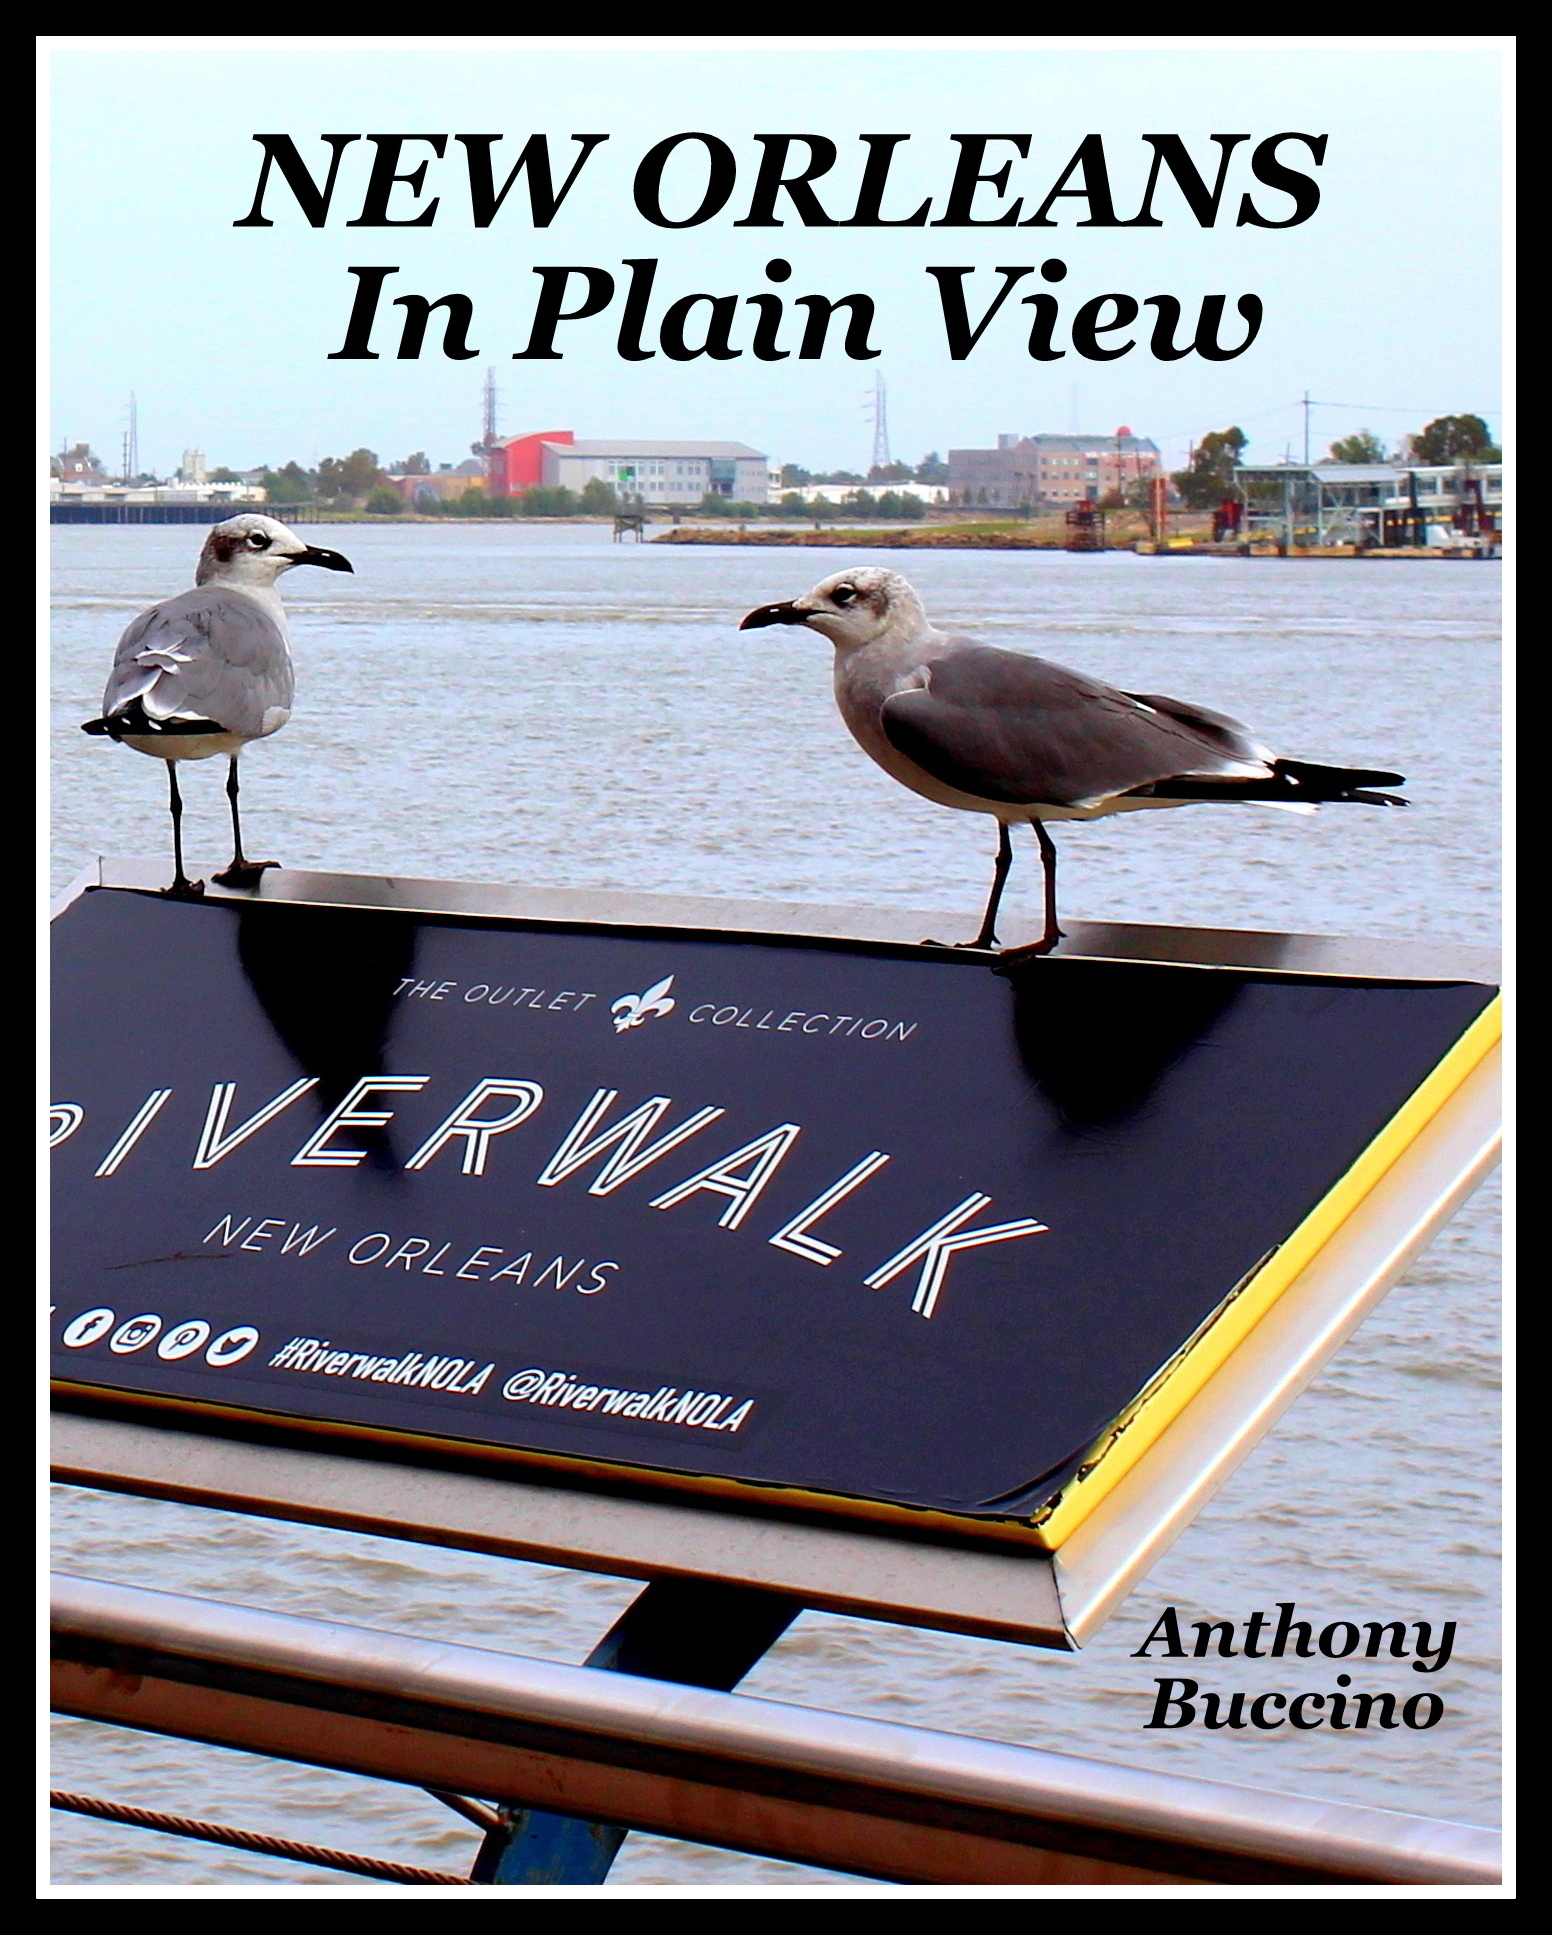 New Orleans In Plain View  by Anthony Buccino, photography